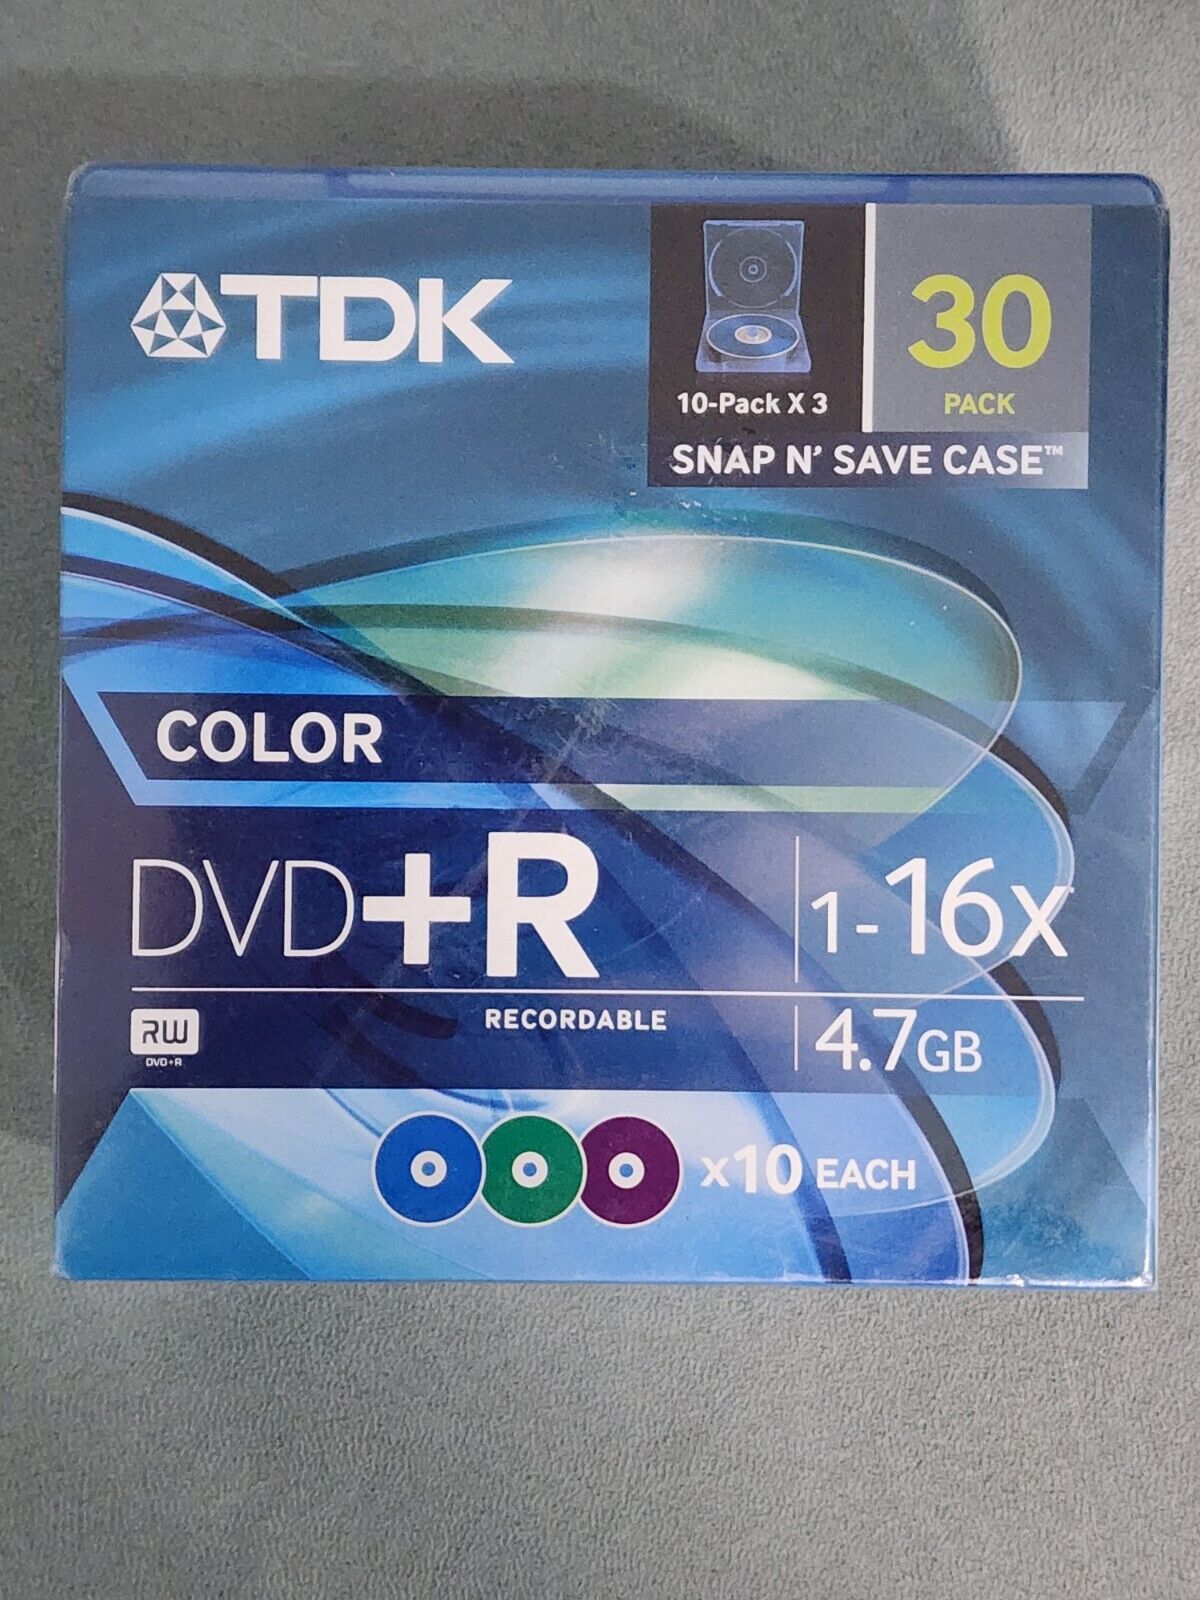 TDK DVD+R 16x 4.7 GB 30 PACK DVD Recordable Sealed NEW